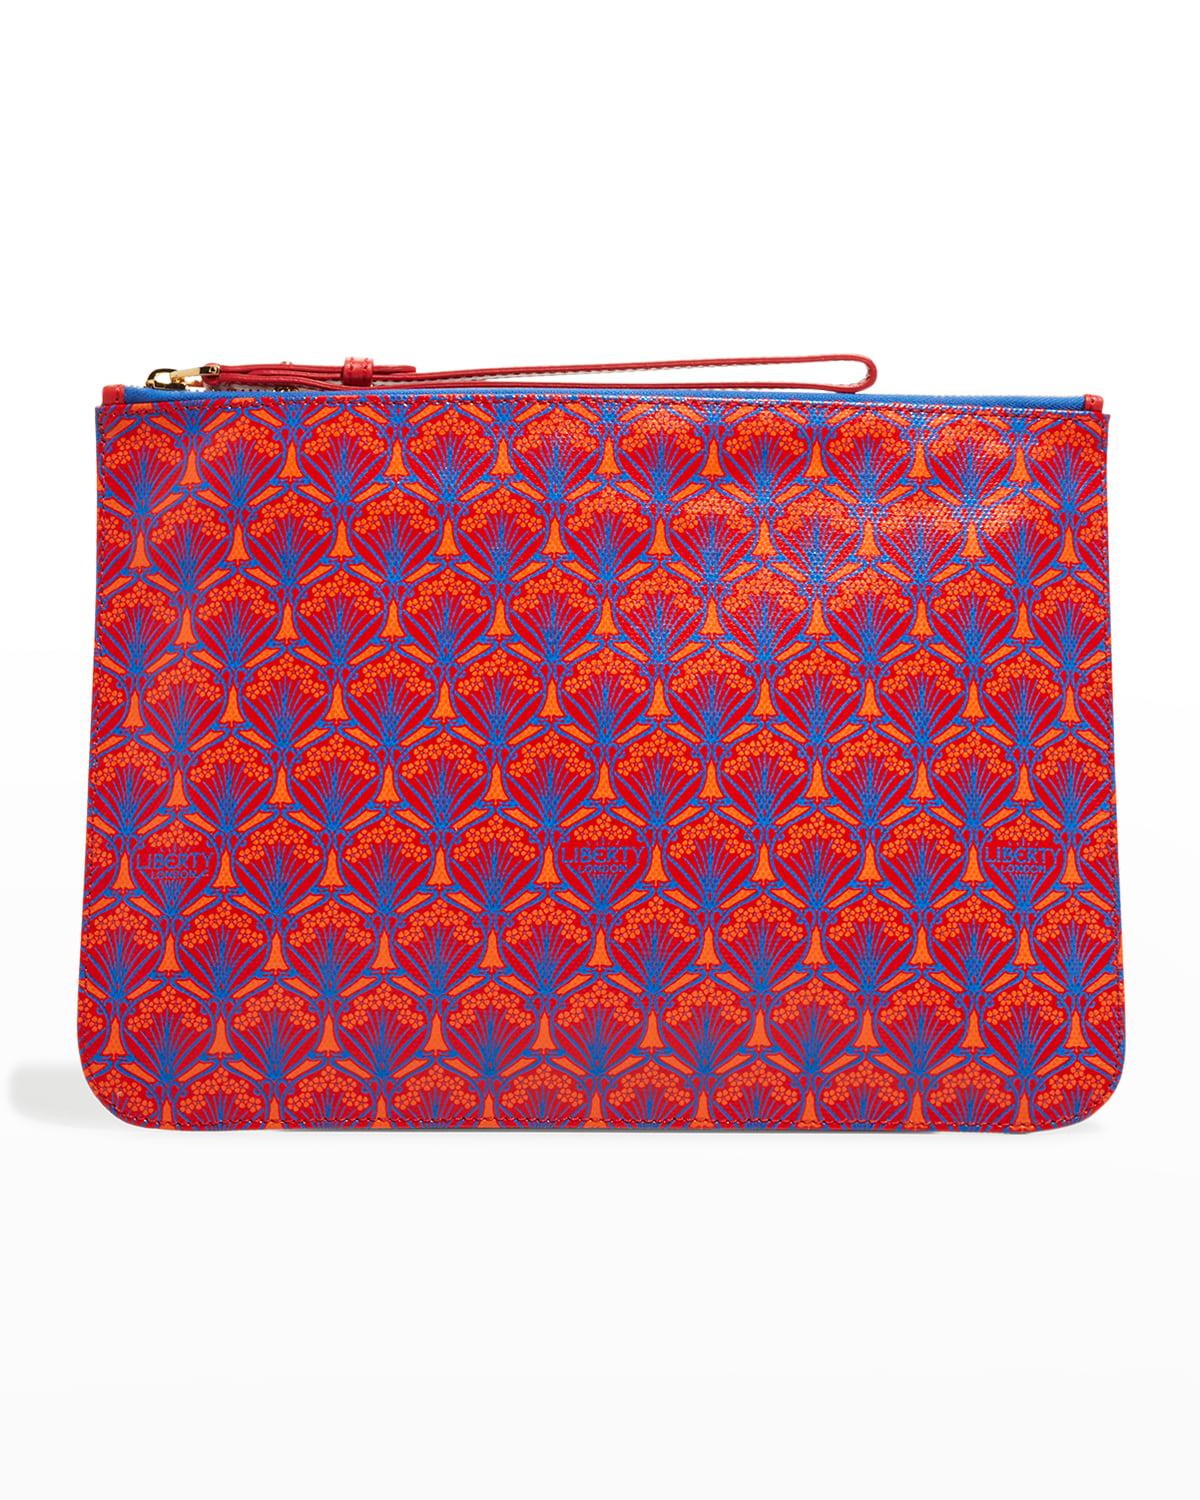 Liberty London Iphis 30 Zip Pouch Printed Clutch Bag